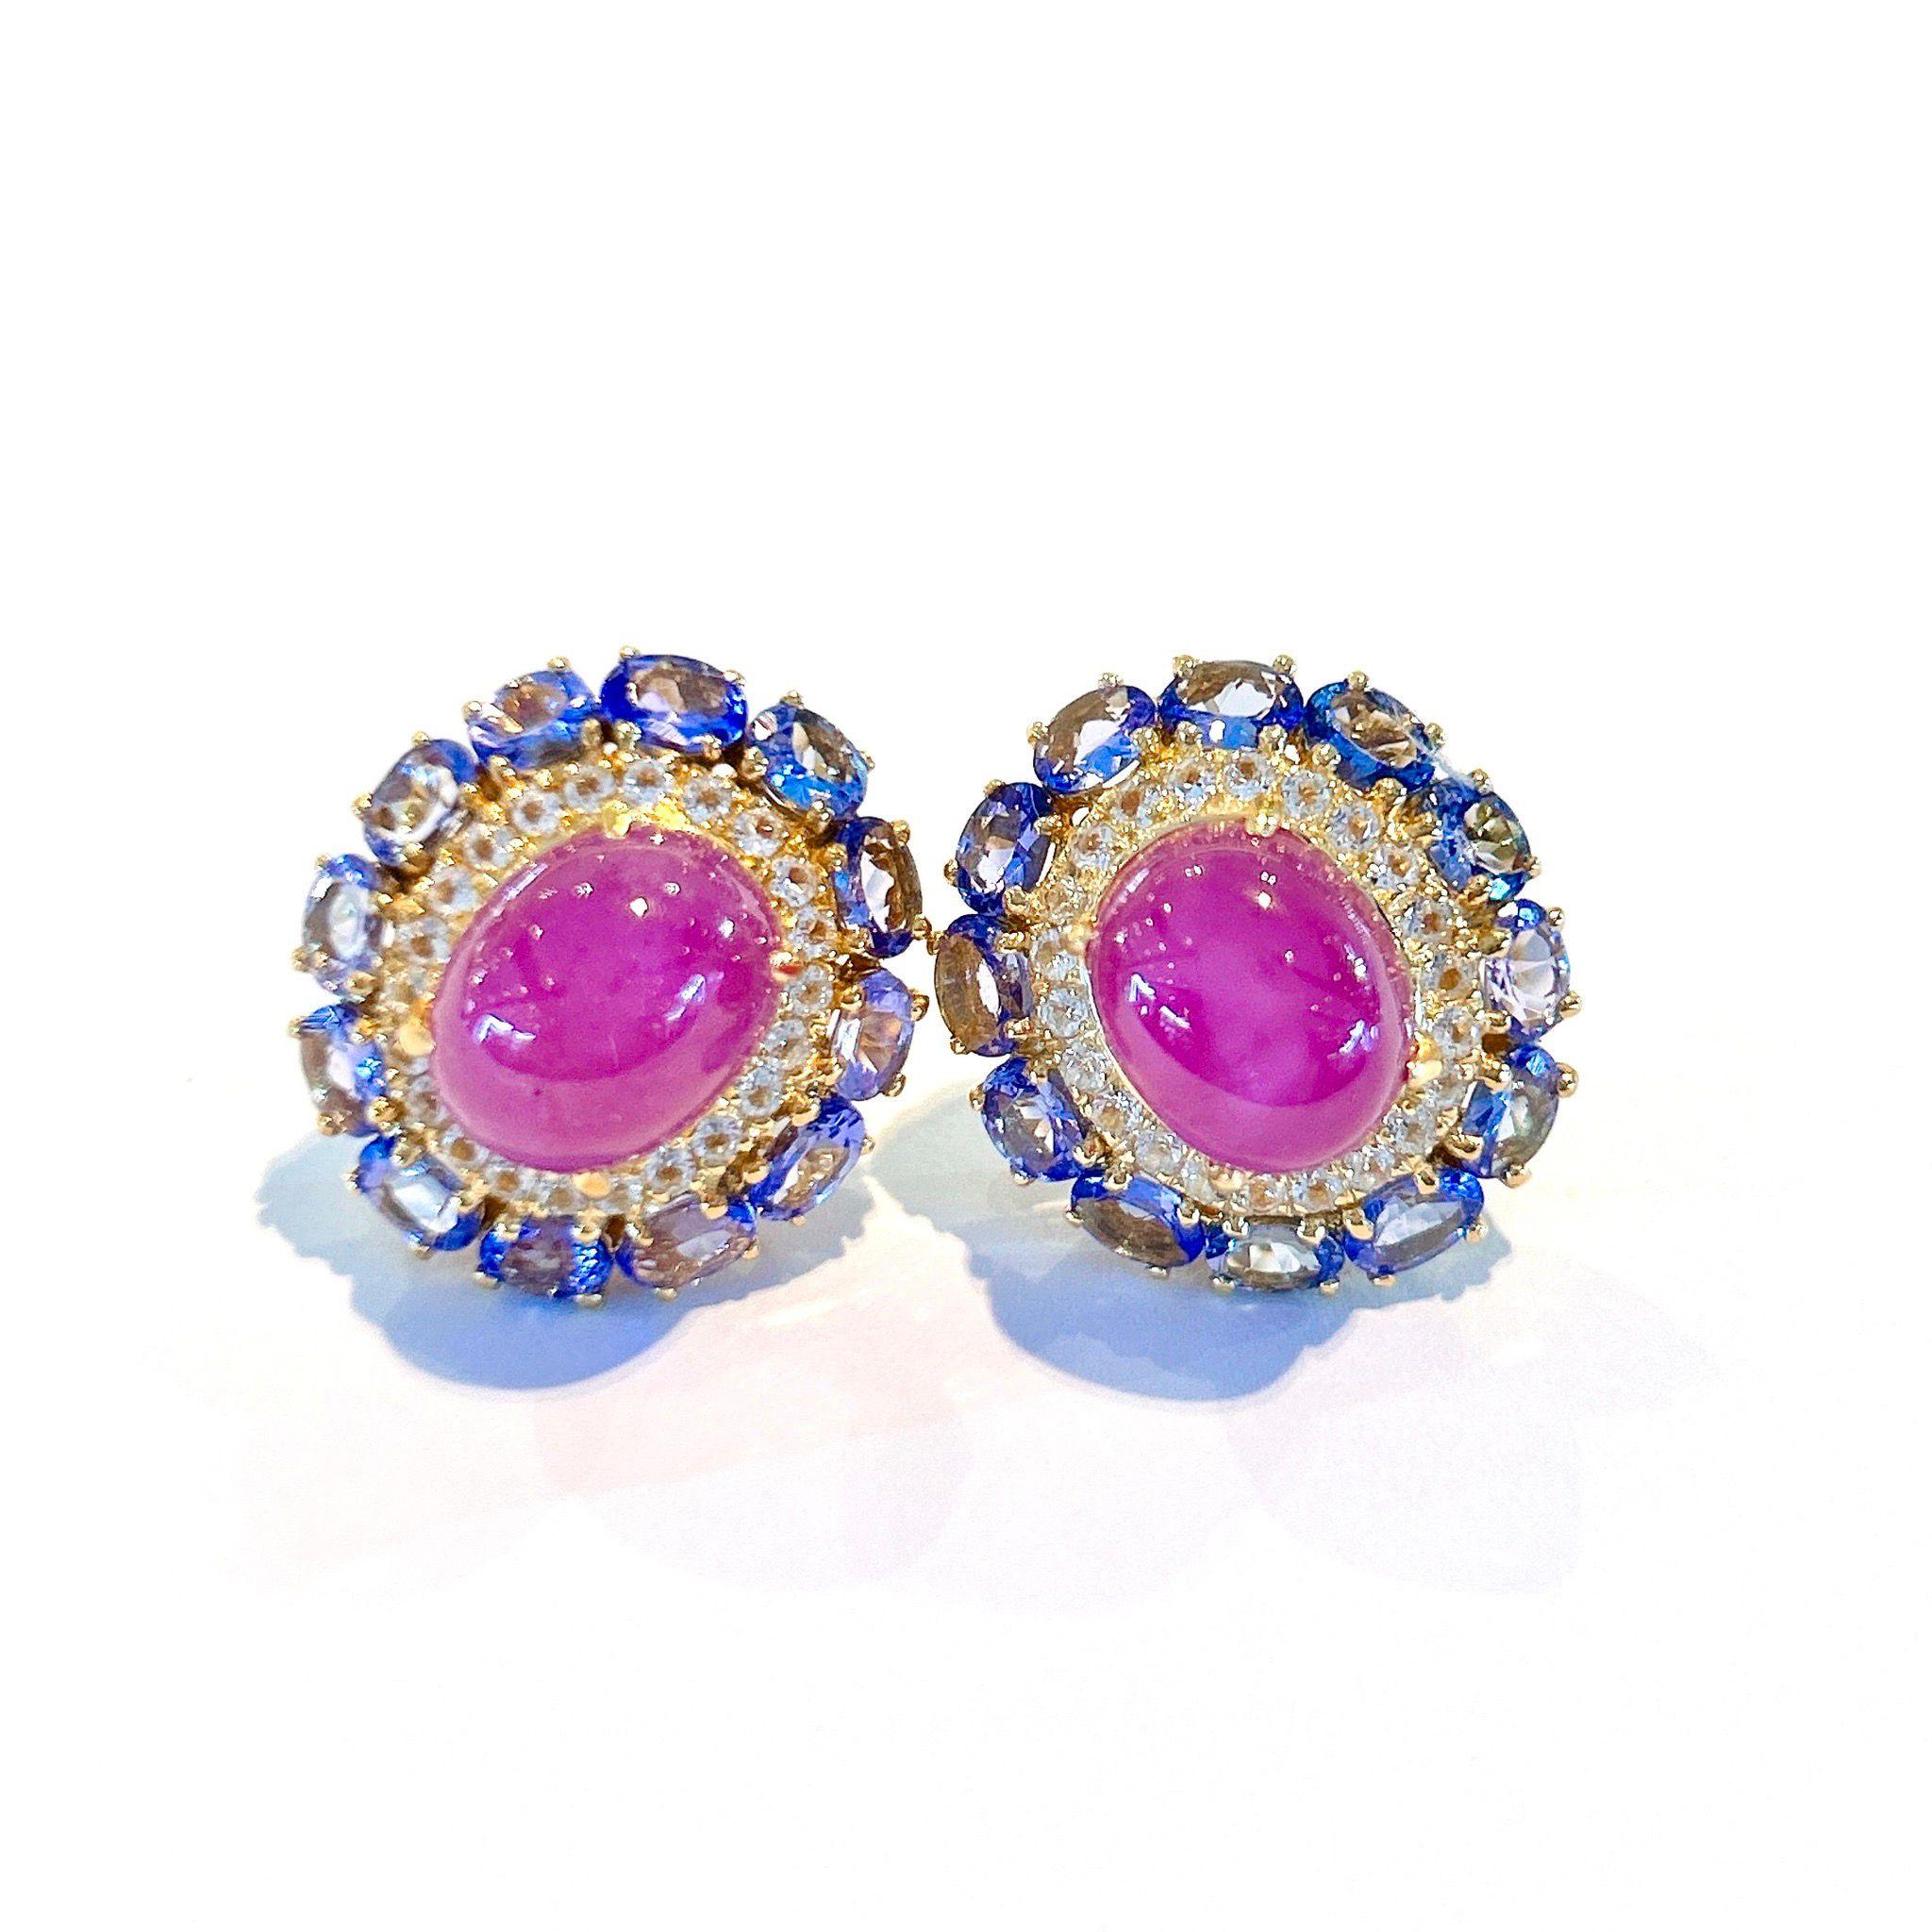 Bochic “Capri” Ruby & Tanzanite Clip on Earrings set in 22K Gold & Silver 
Beautiful Natural Red cabochon Rubies - 19 carats
Natural Purple Color Tanzanite  - 9 carats 
Round brilliant shapes 
Natural white Topaz  - 4 Carats 
Round and oval